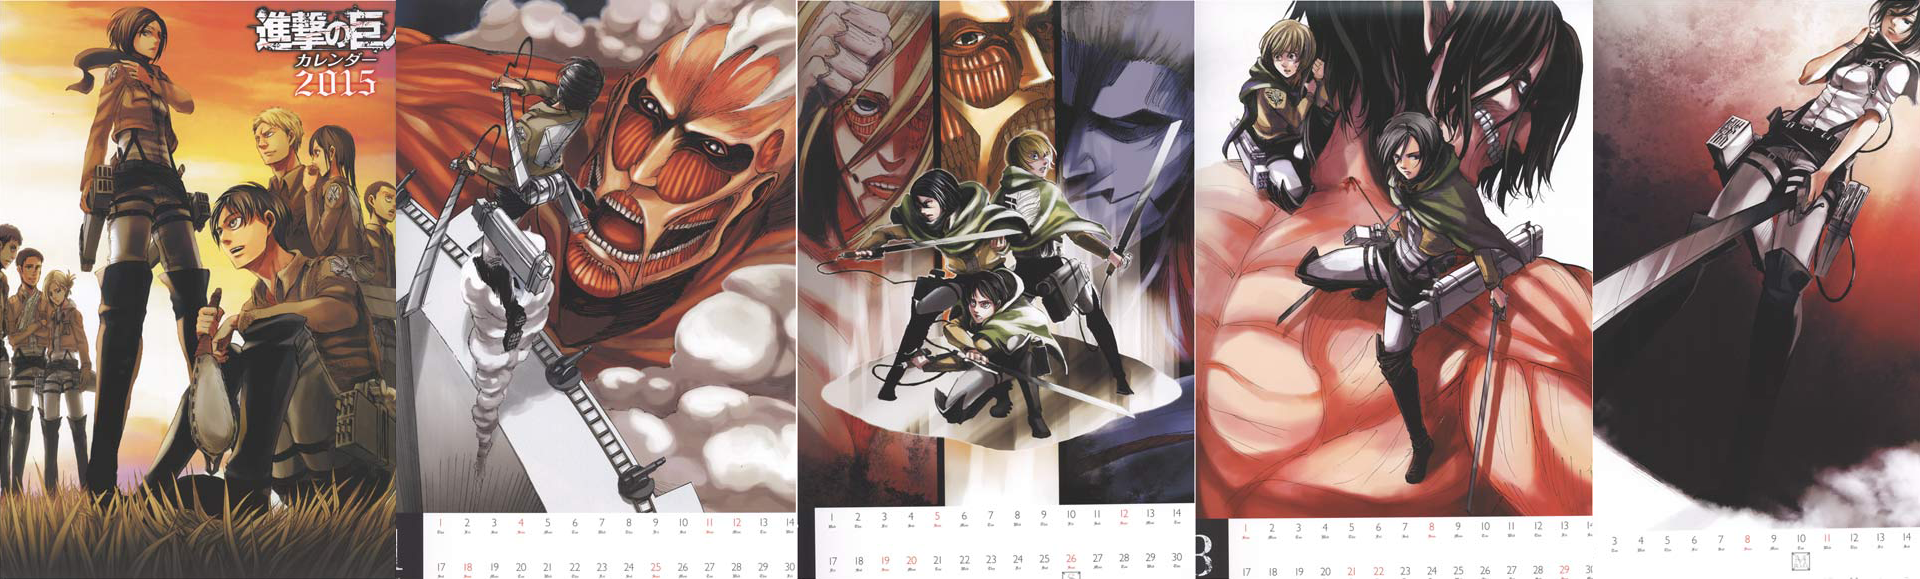 Most Wished for 2015 Anime Calendars haruhichan.com Attack on Titan calendar